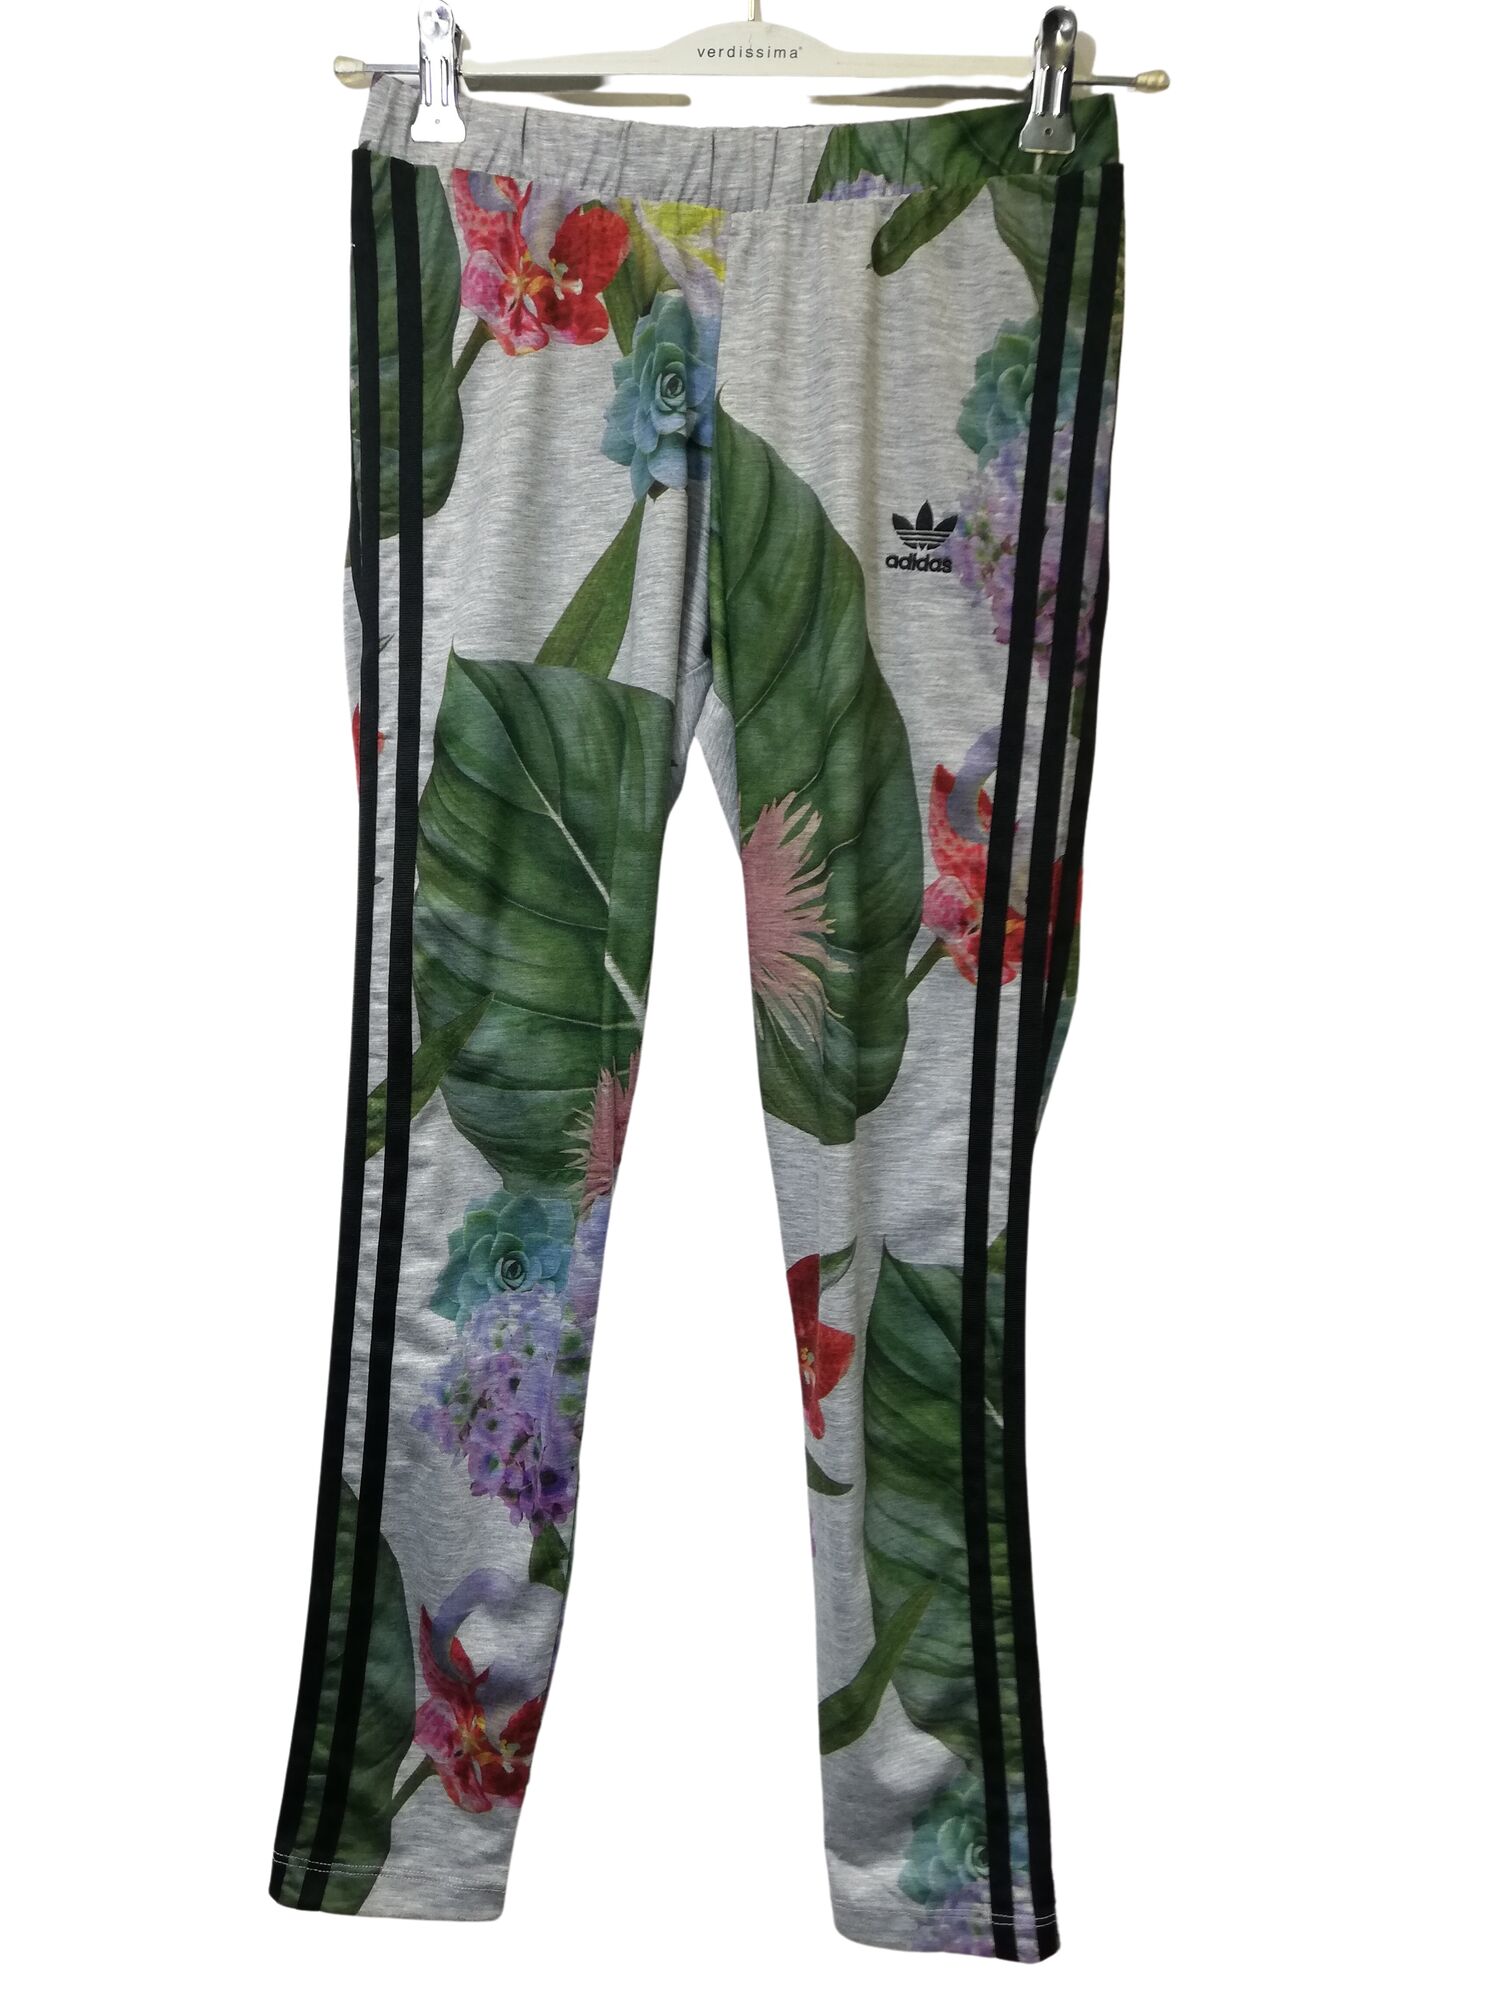 Sport floral tracksuit Adidas - FR 38, pre-owned at 60 EUR